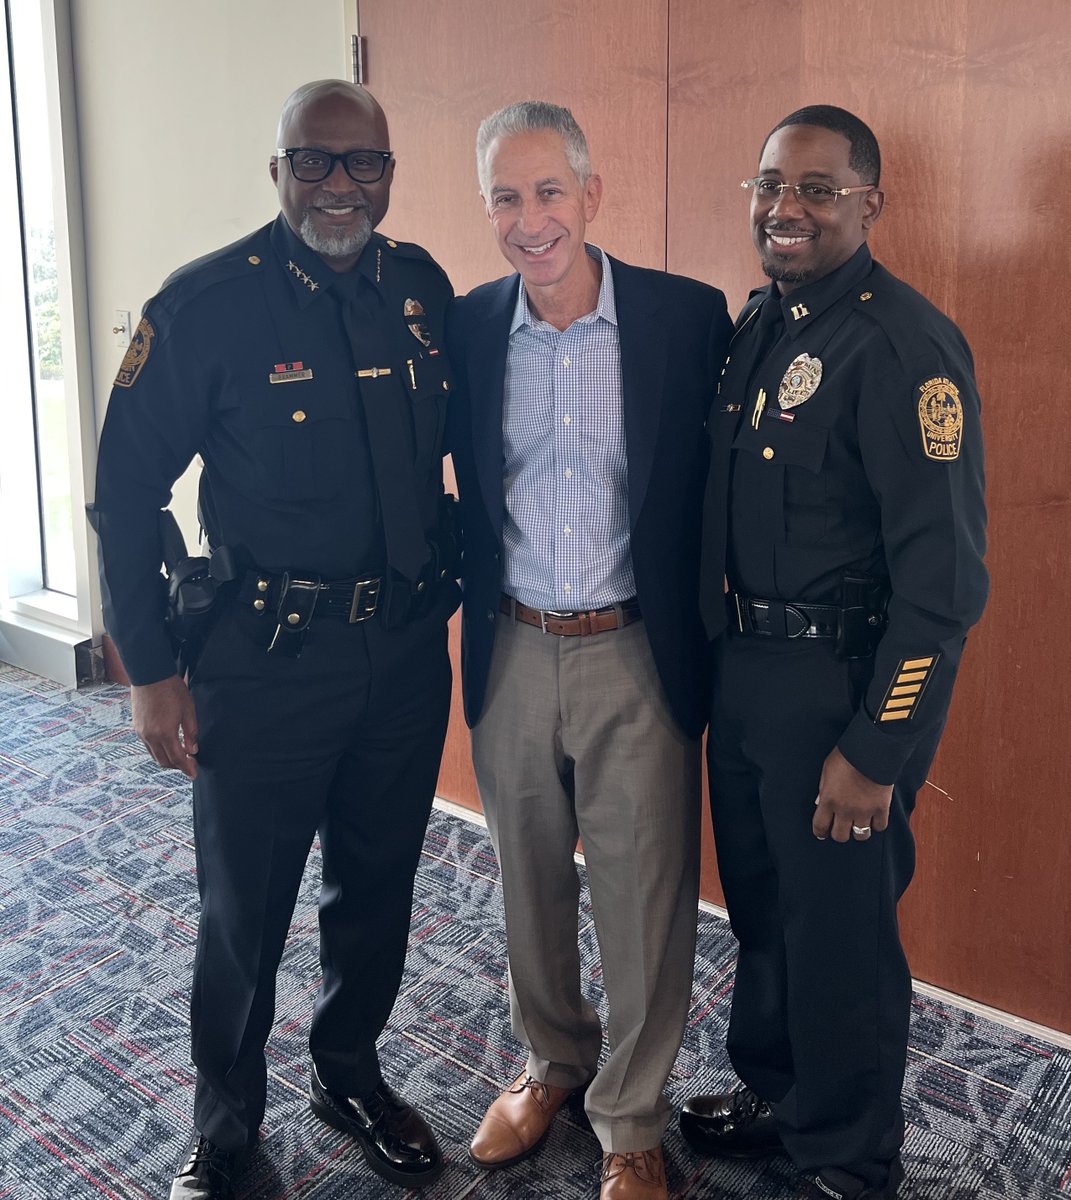 Dr. Staller loved catching up with Chief Sean Brammer & Captain Ed Delancy at the FAU Police Department Award Ceremony last week! 

The years may change, but our love for FAU never wavers! ❤️ 

#FAU #FAUMBB #LoveFAU #FloridaAtlanticUniversity #southflorida #letsgoowls